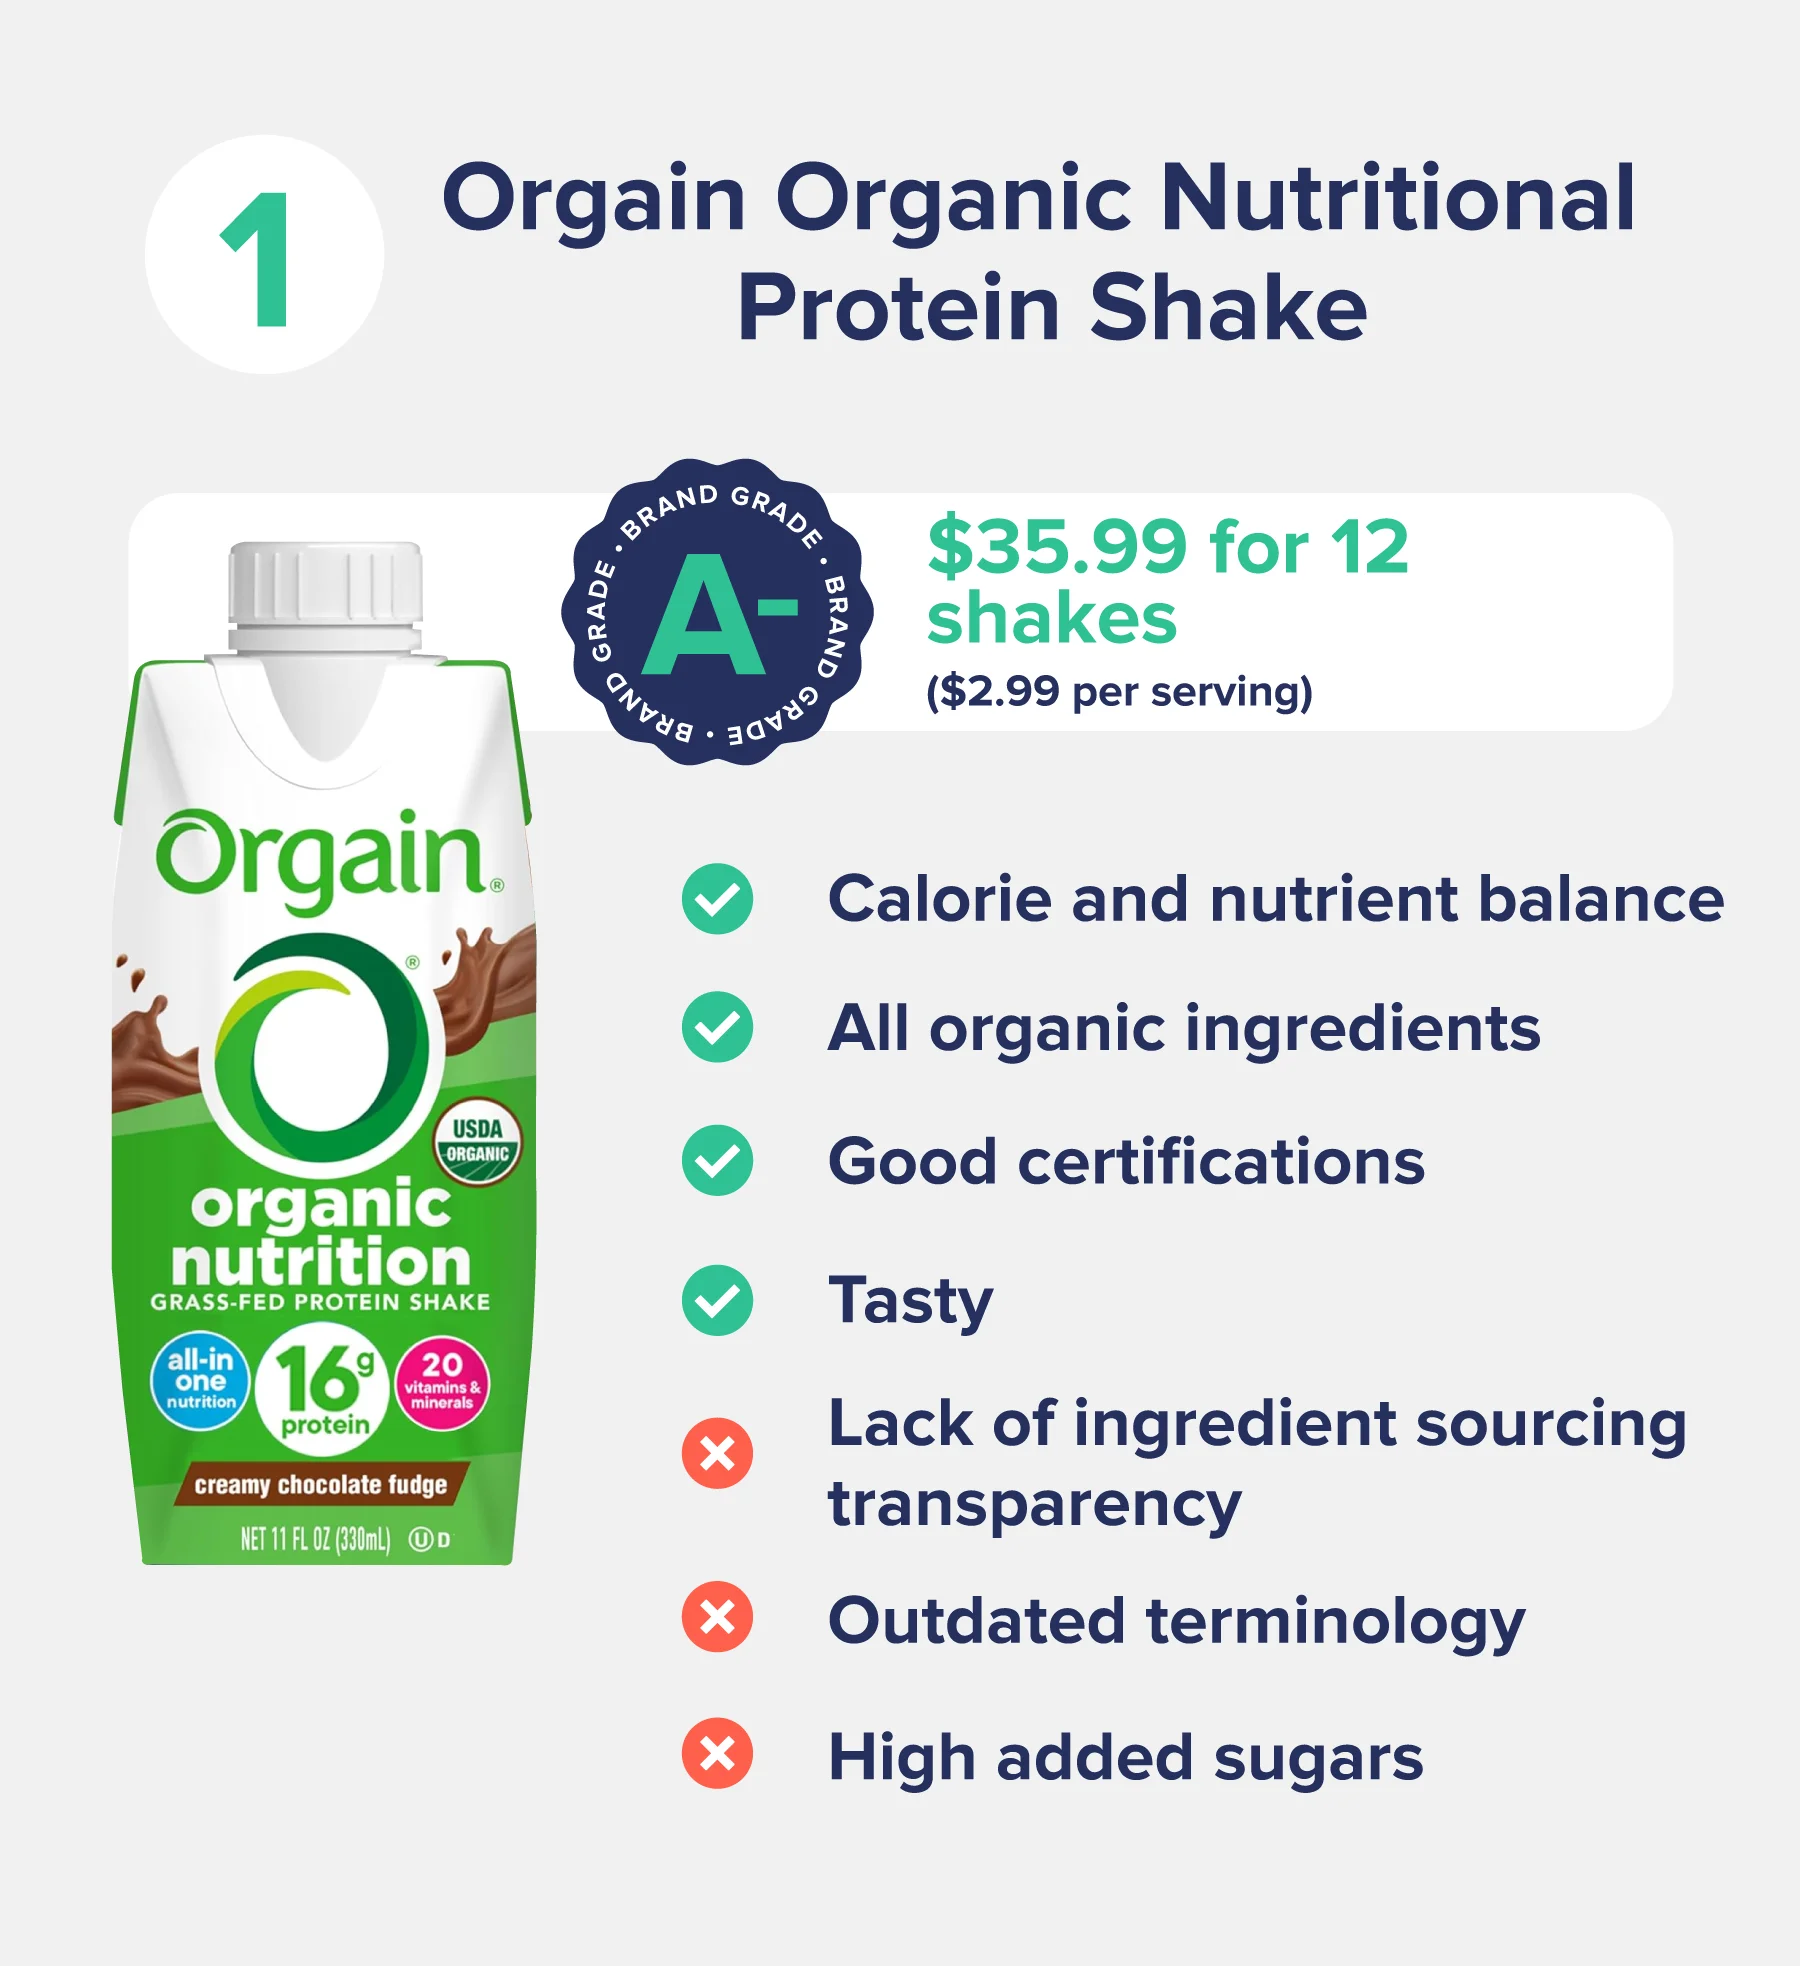 Orgain Organic Nutritional Protein Shake with list of pros and cons